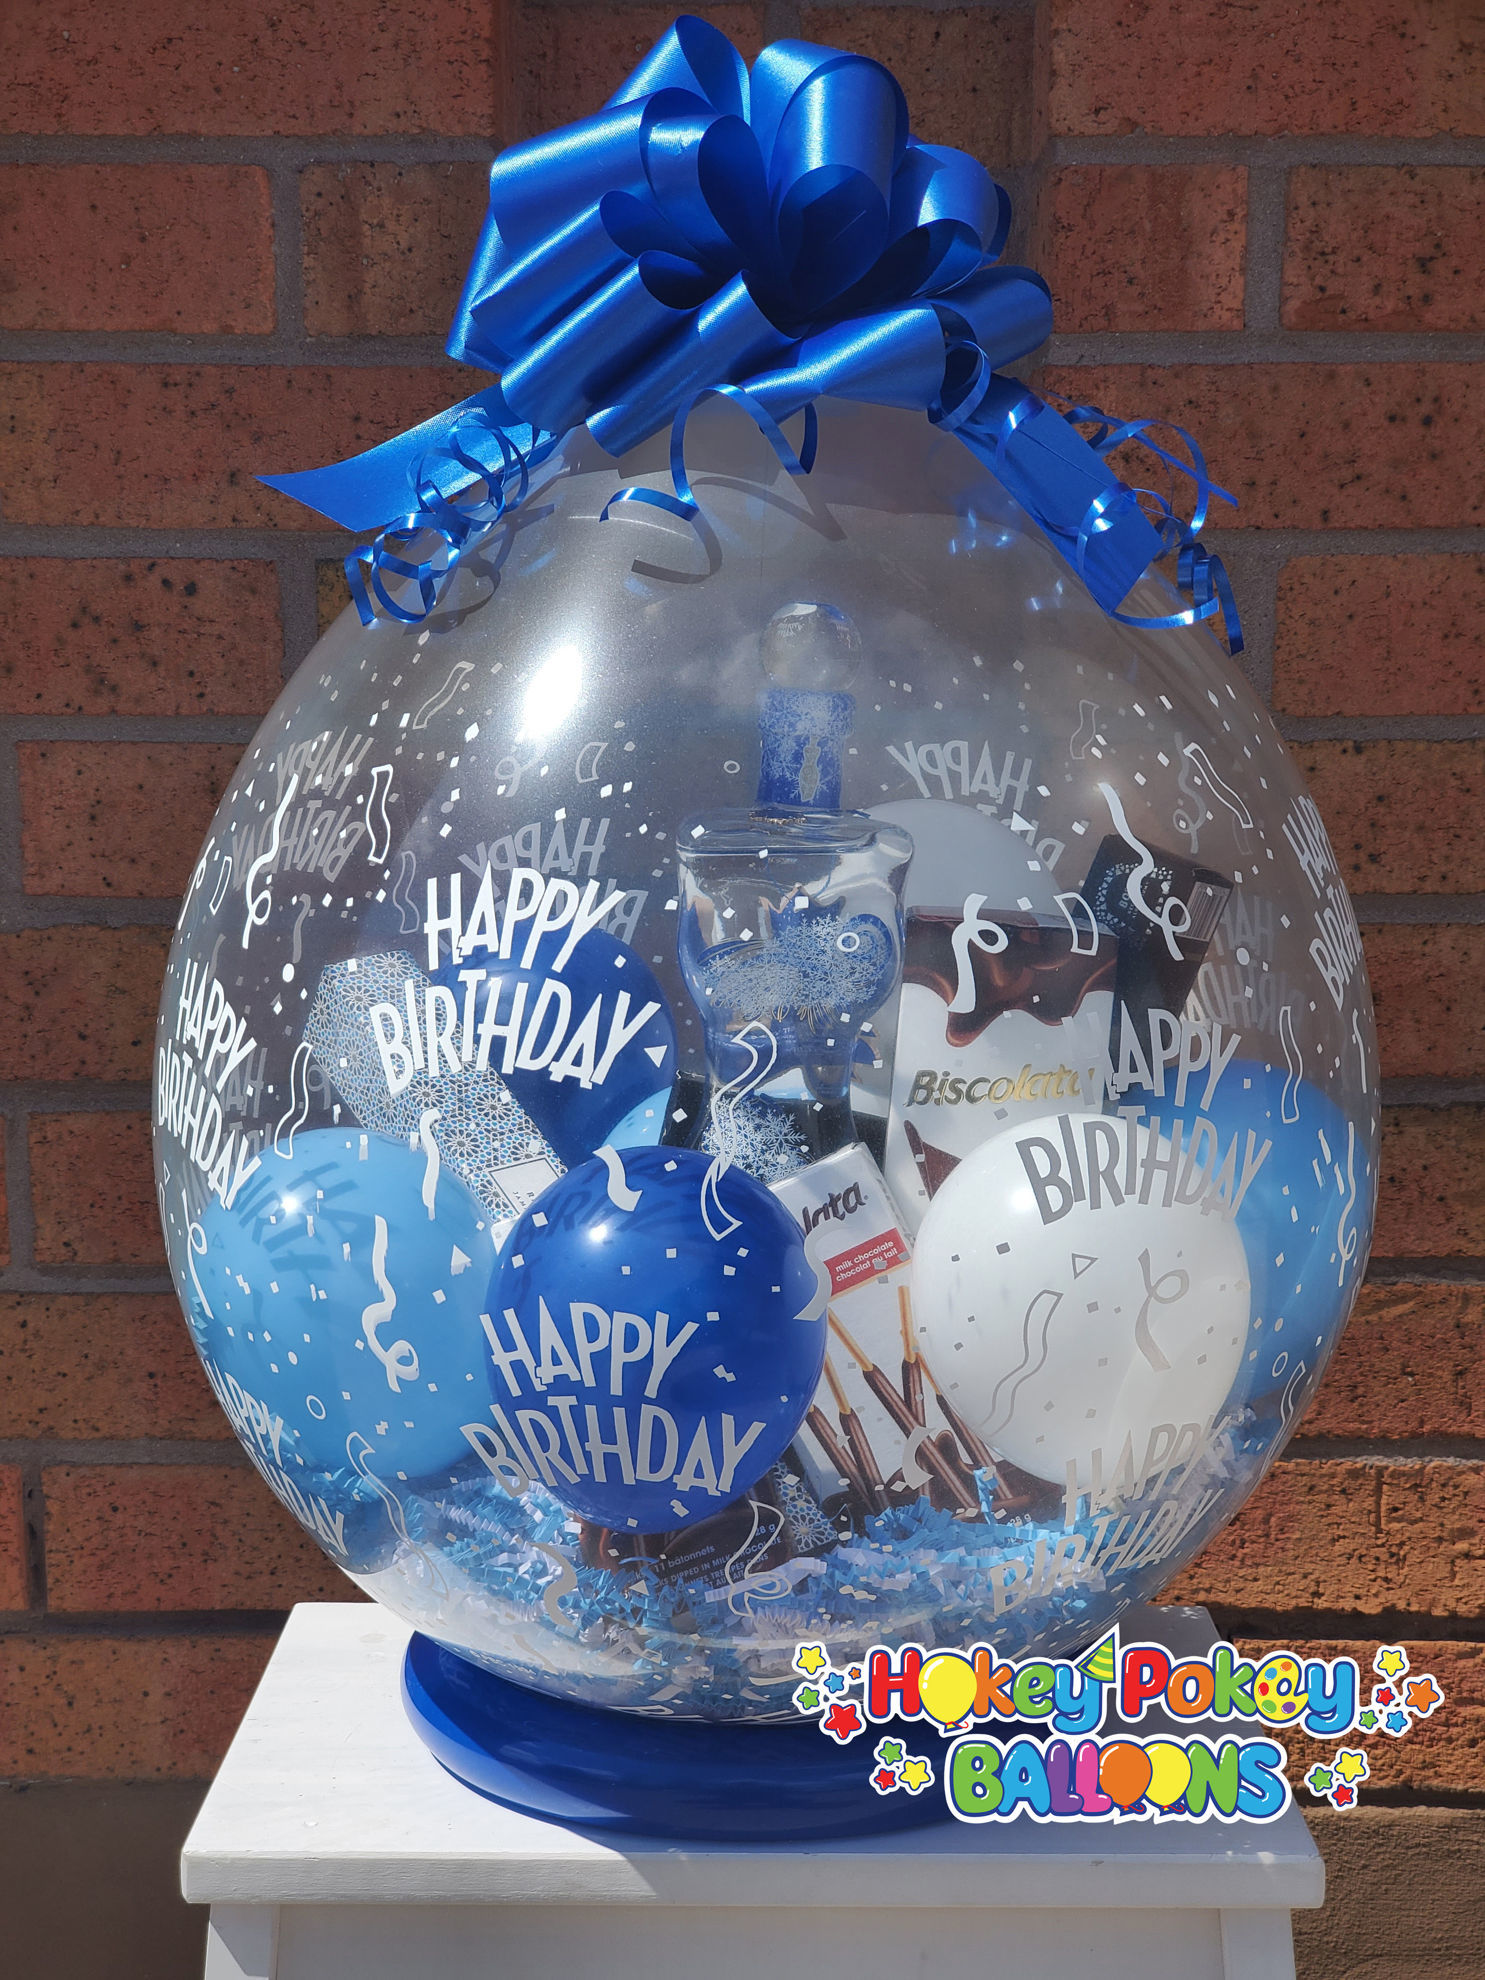 Picture of Bring Your Own Gift - Stuffed Balloon with Bow